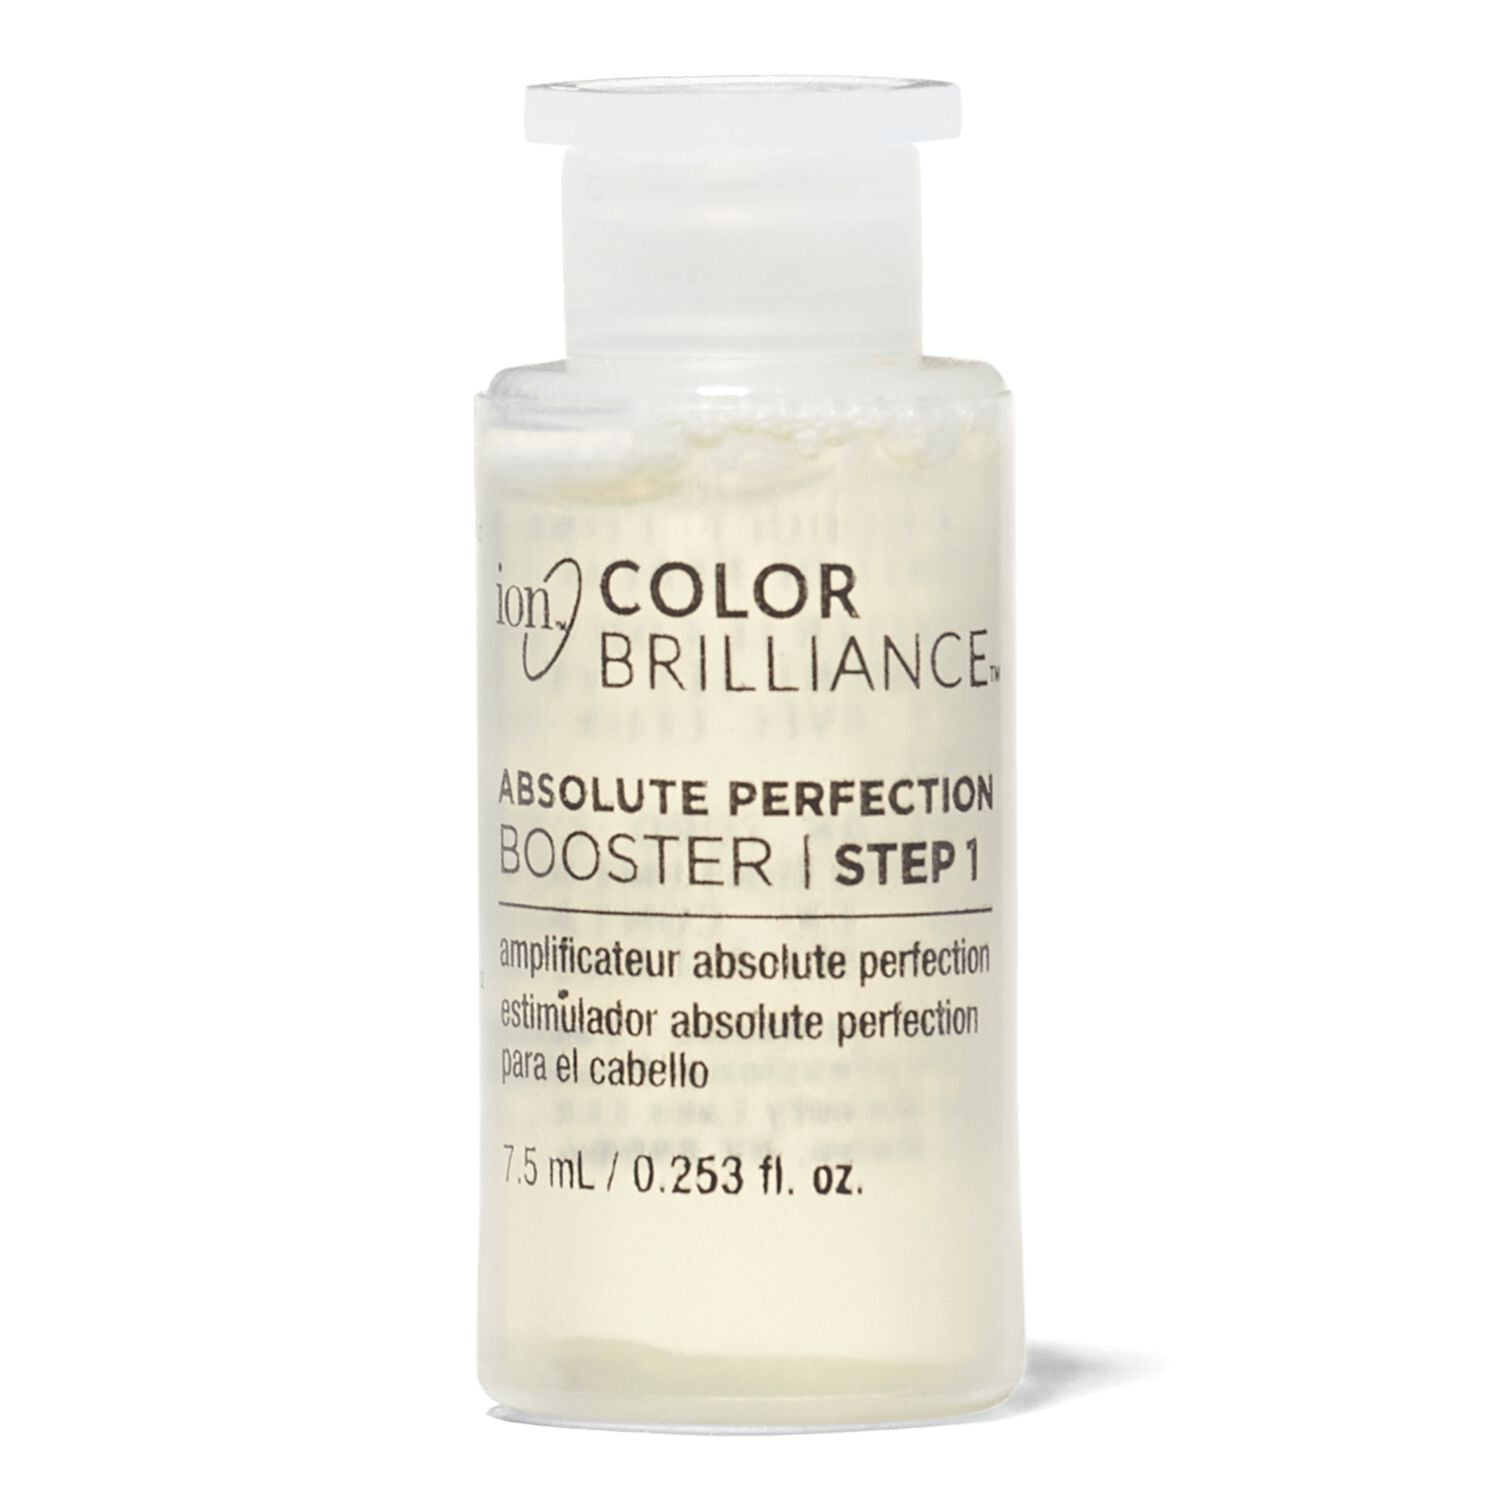 Color Brilliance  by   ion Absolute Perfection Booster Step 1